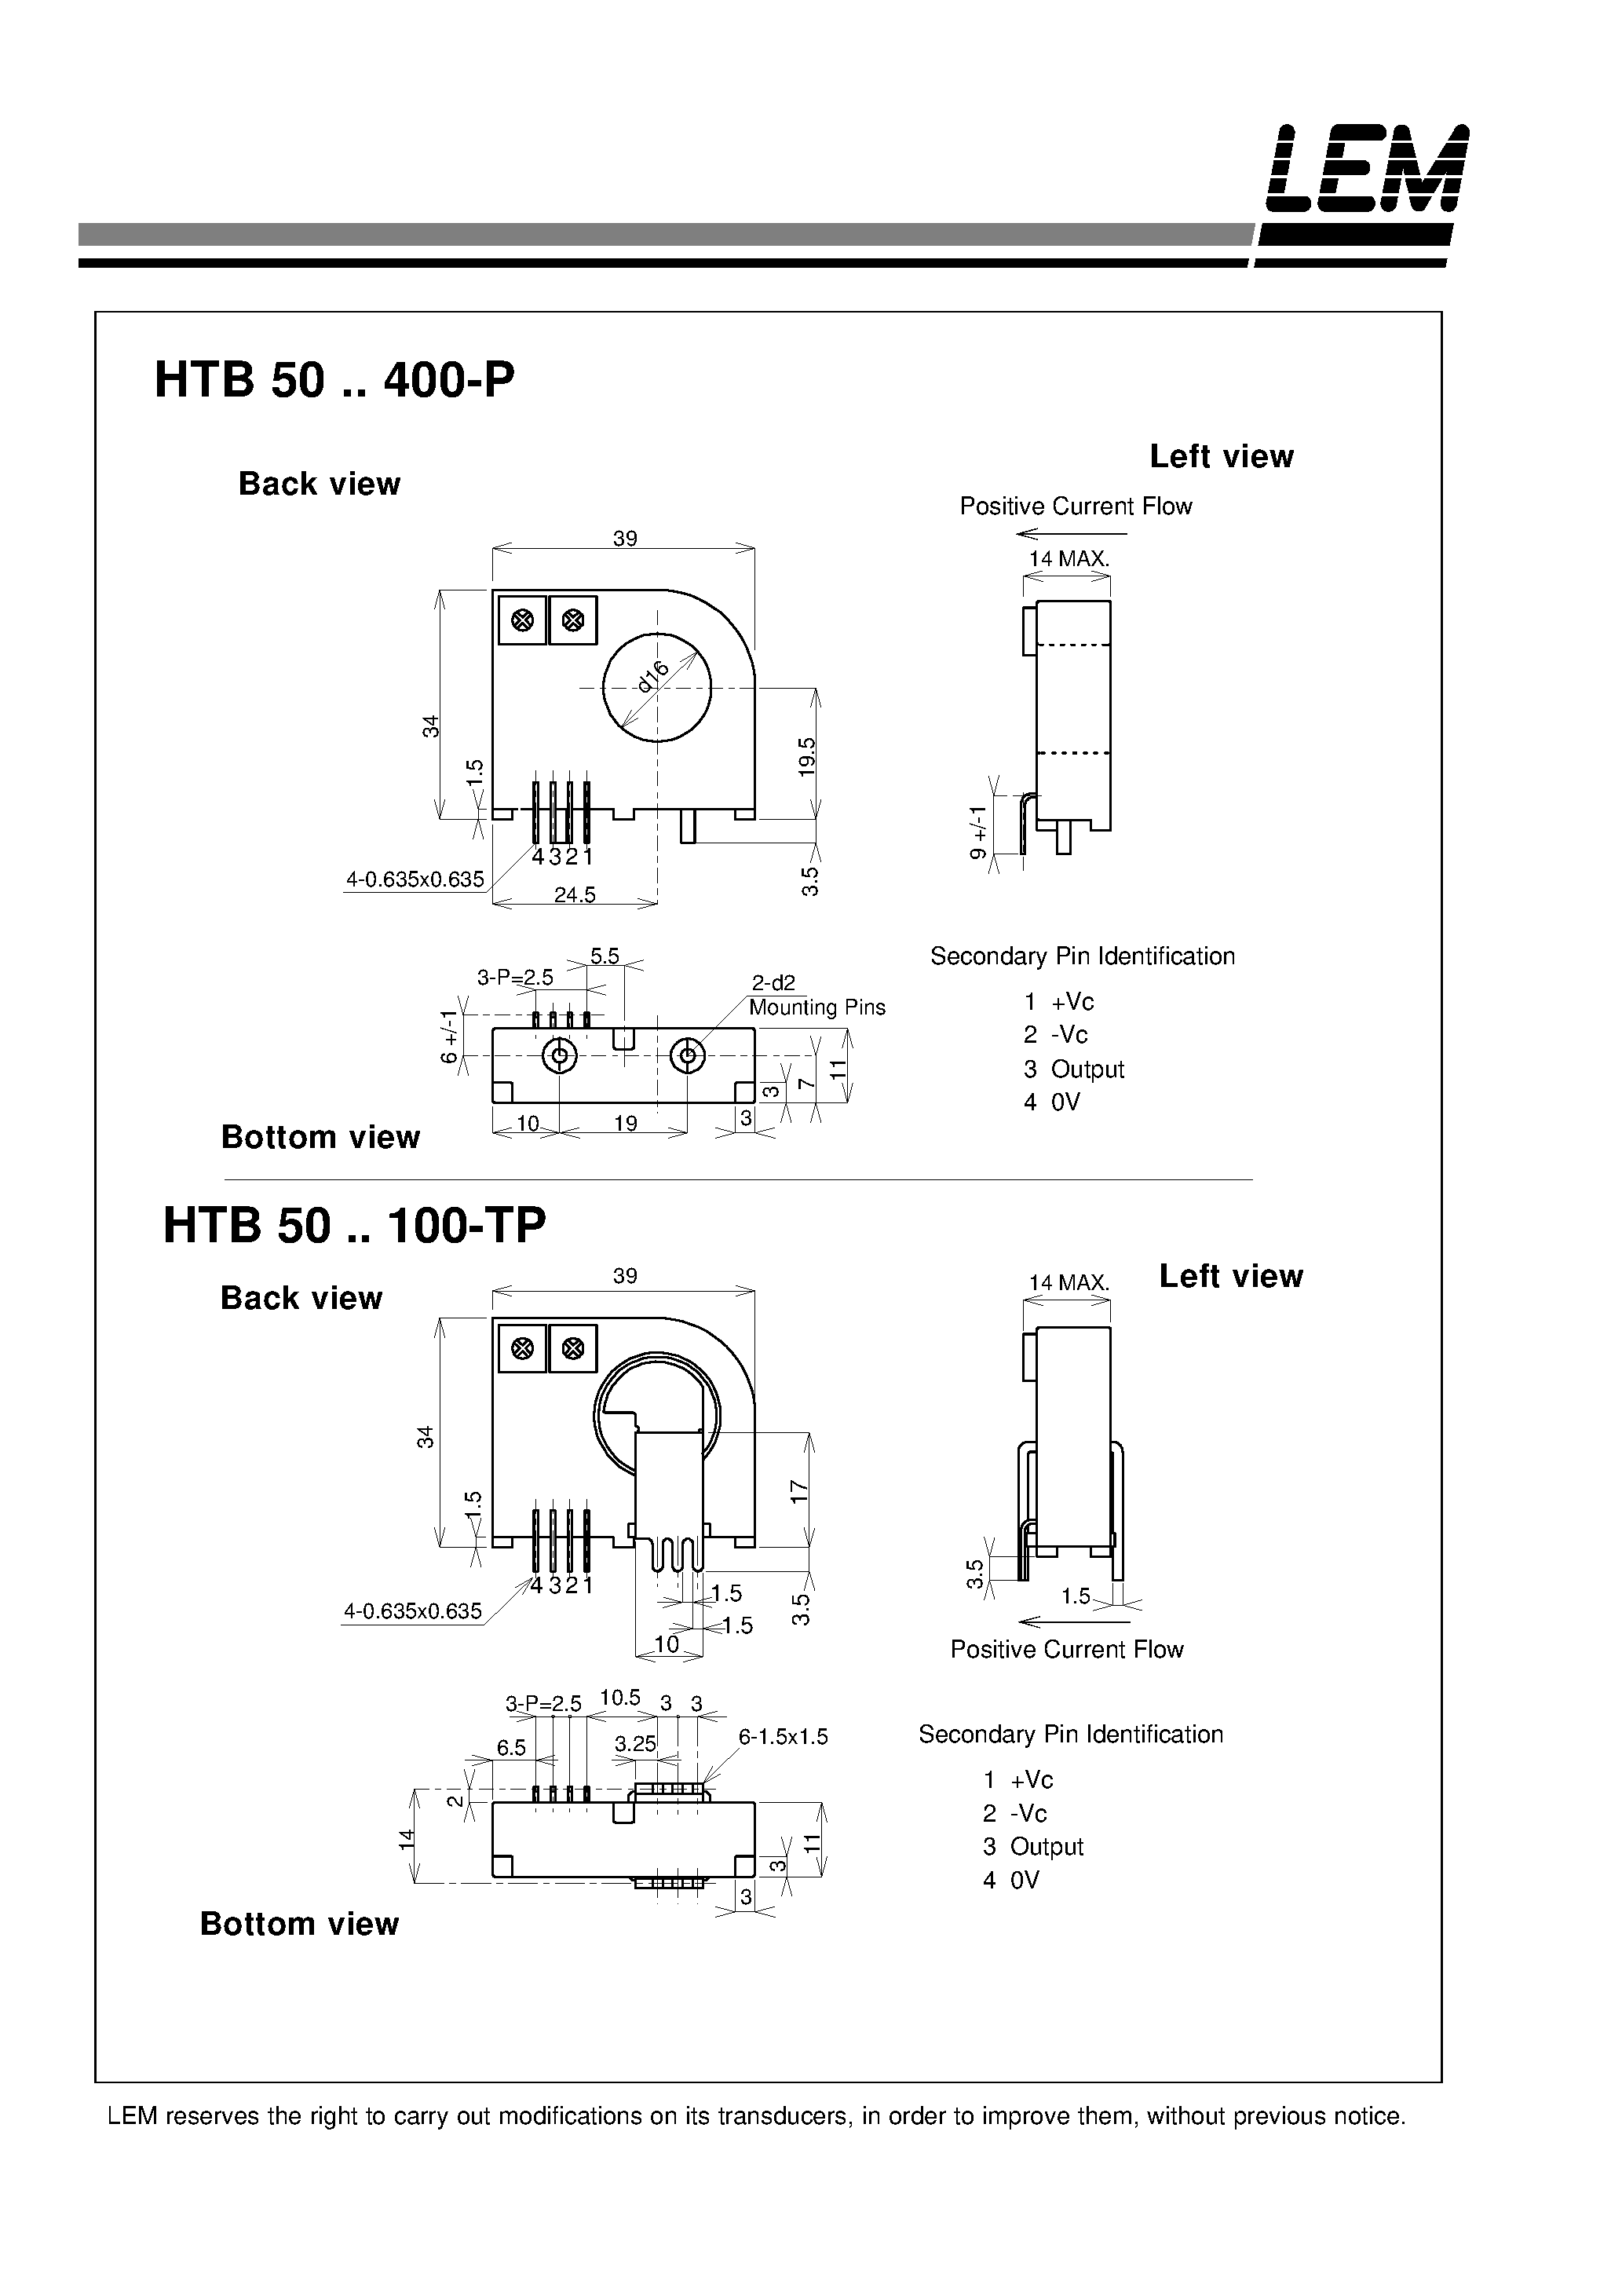 Datasheet HTB200-P - Current Transducers HTB 50~400-P and HTB 50~100-TP page 2